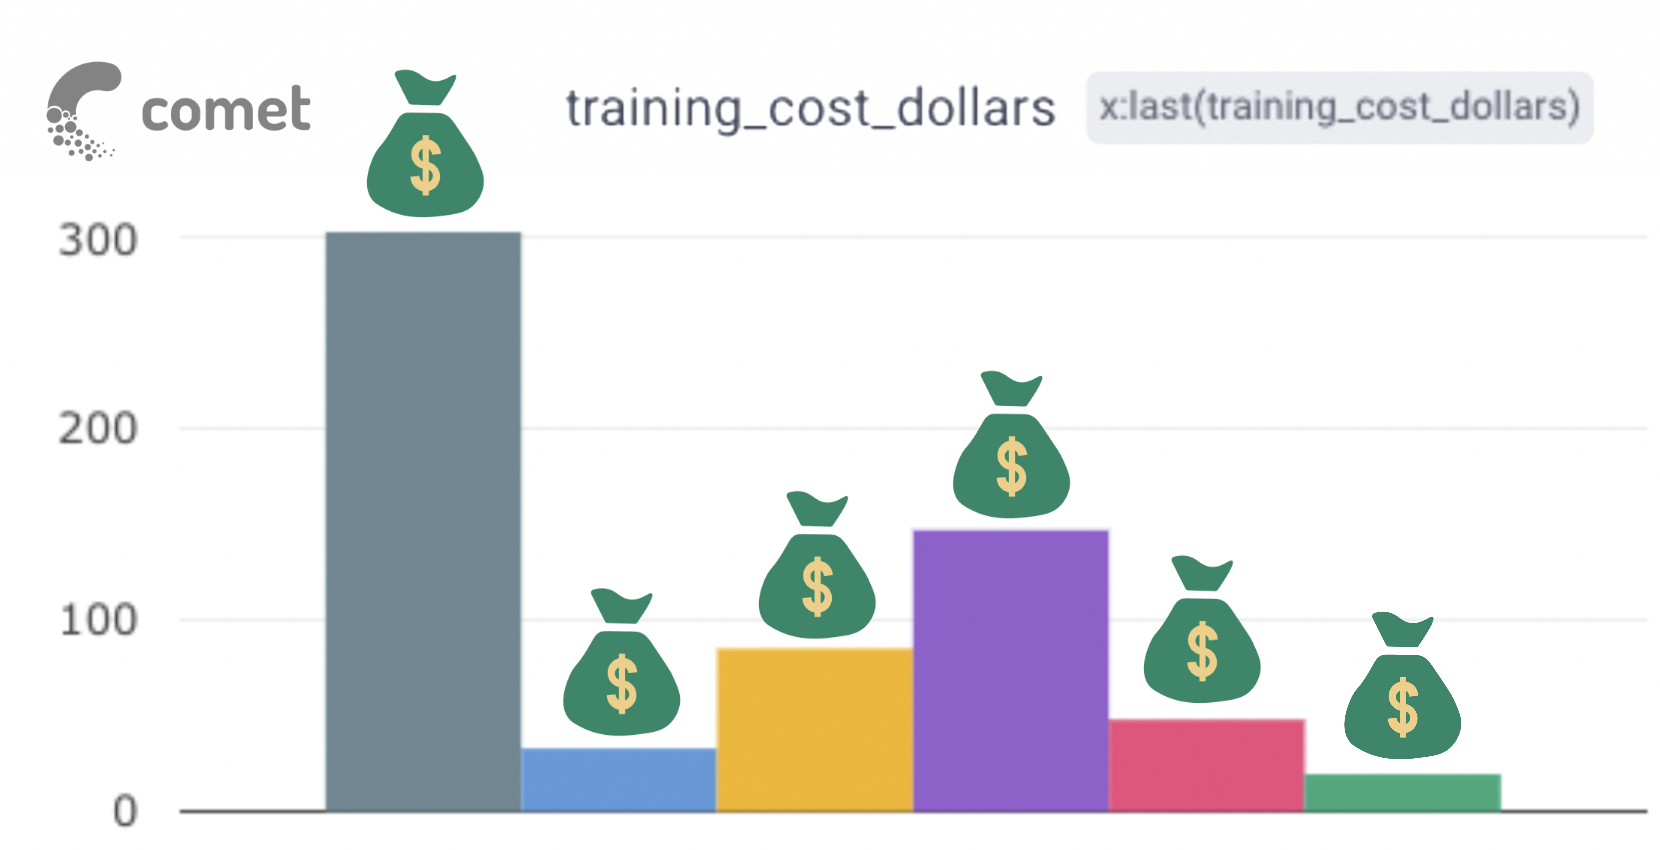 Comet ML save money on training costs by optimizing training